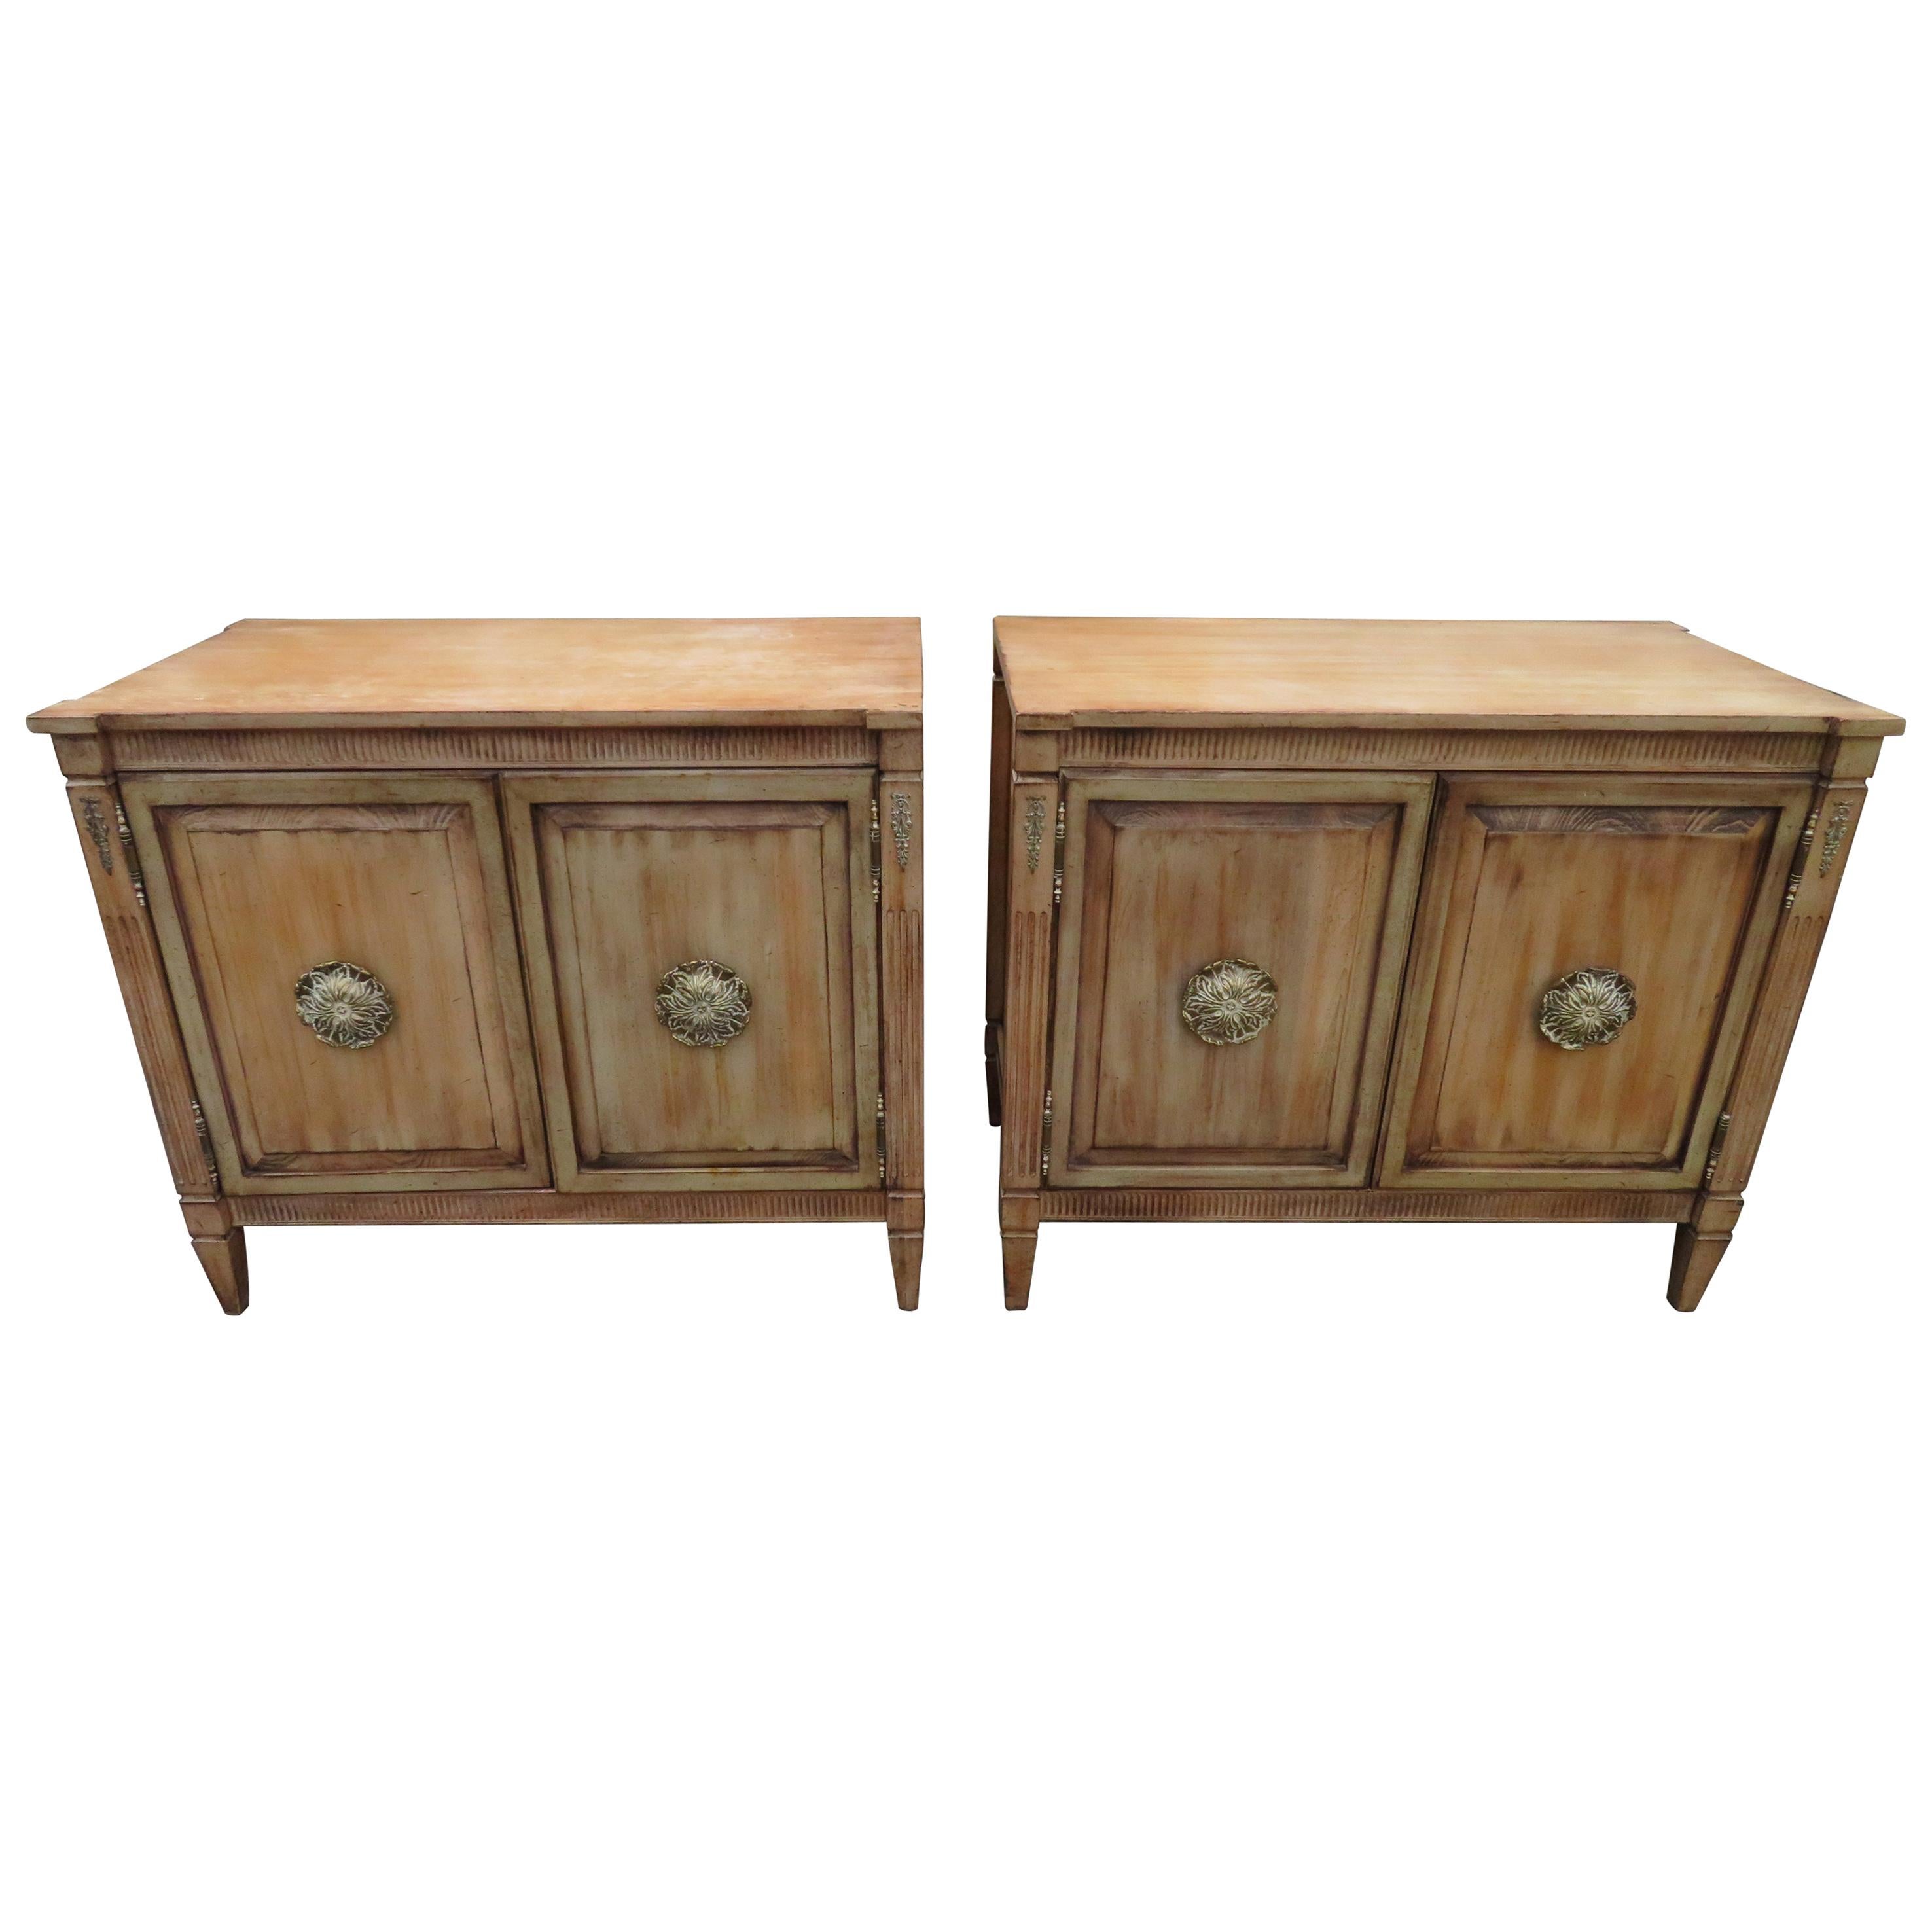 Stunning Pair of Neoclassical Distressed Bachelors Chests Hollywood Regency For Sale